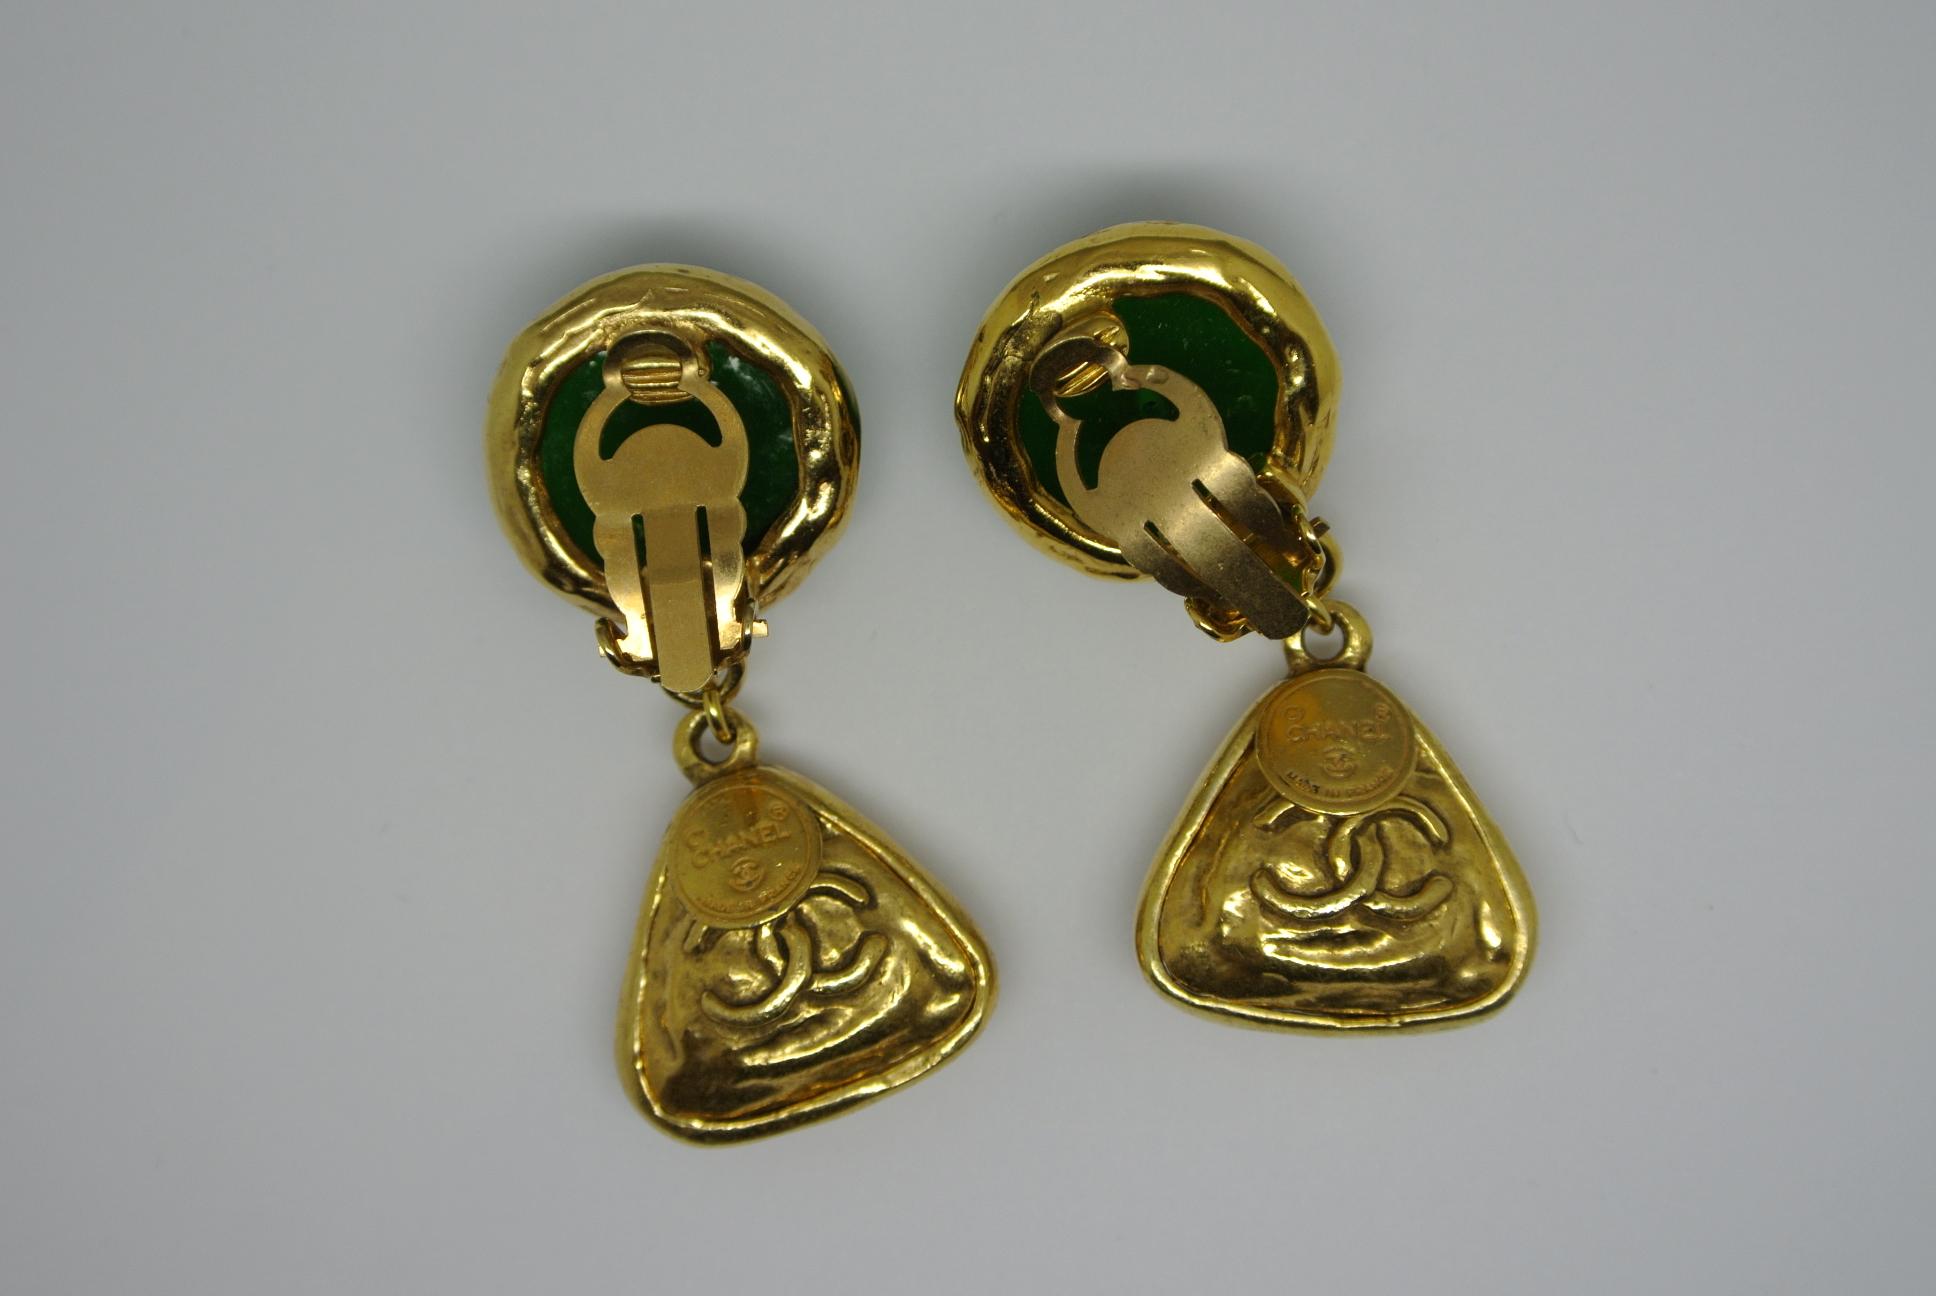 Chanel green glass top earrings, with logo gold-tone drop. Dated 1970s. Good condition. 